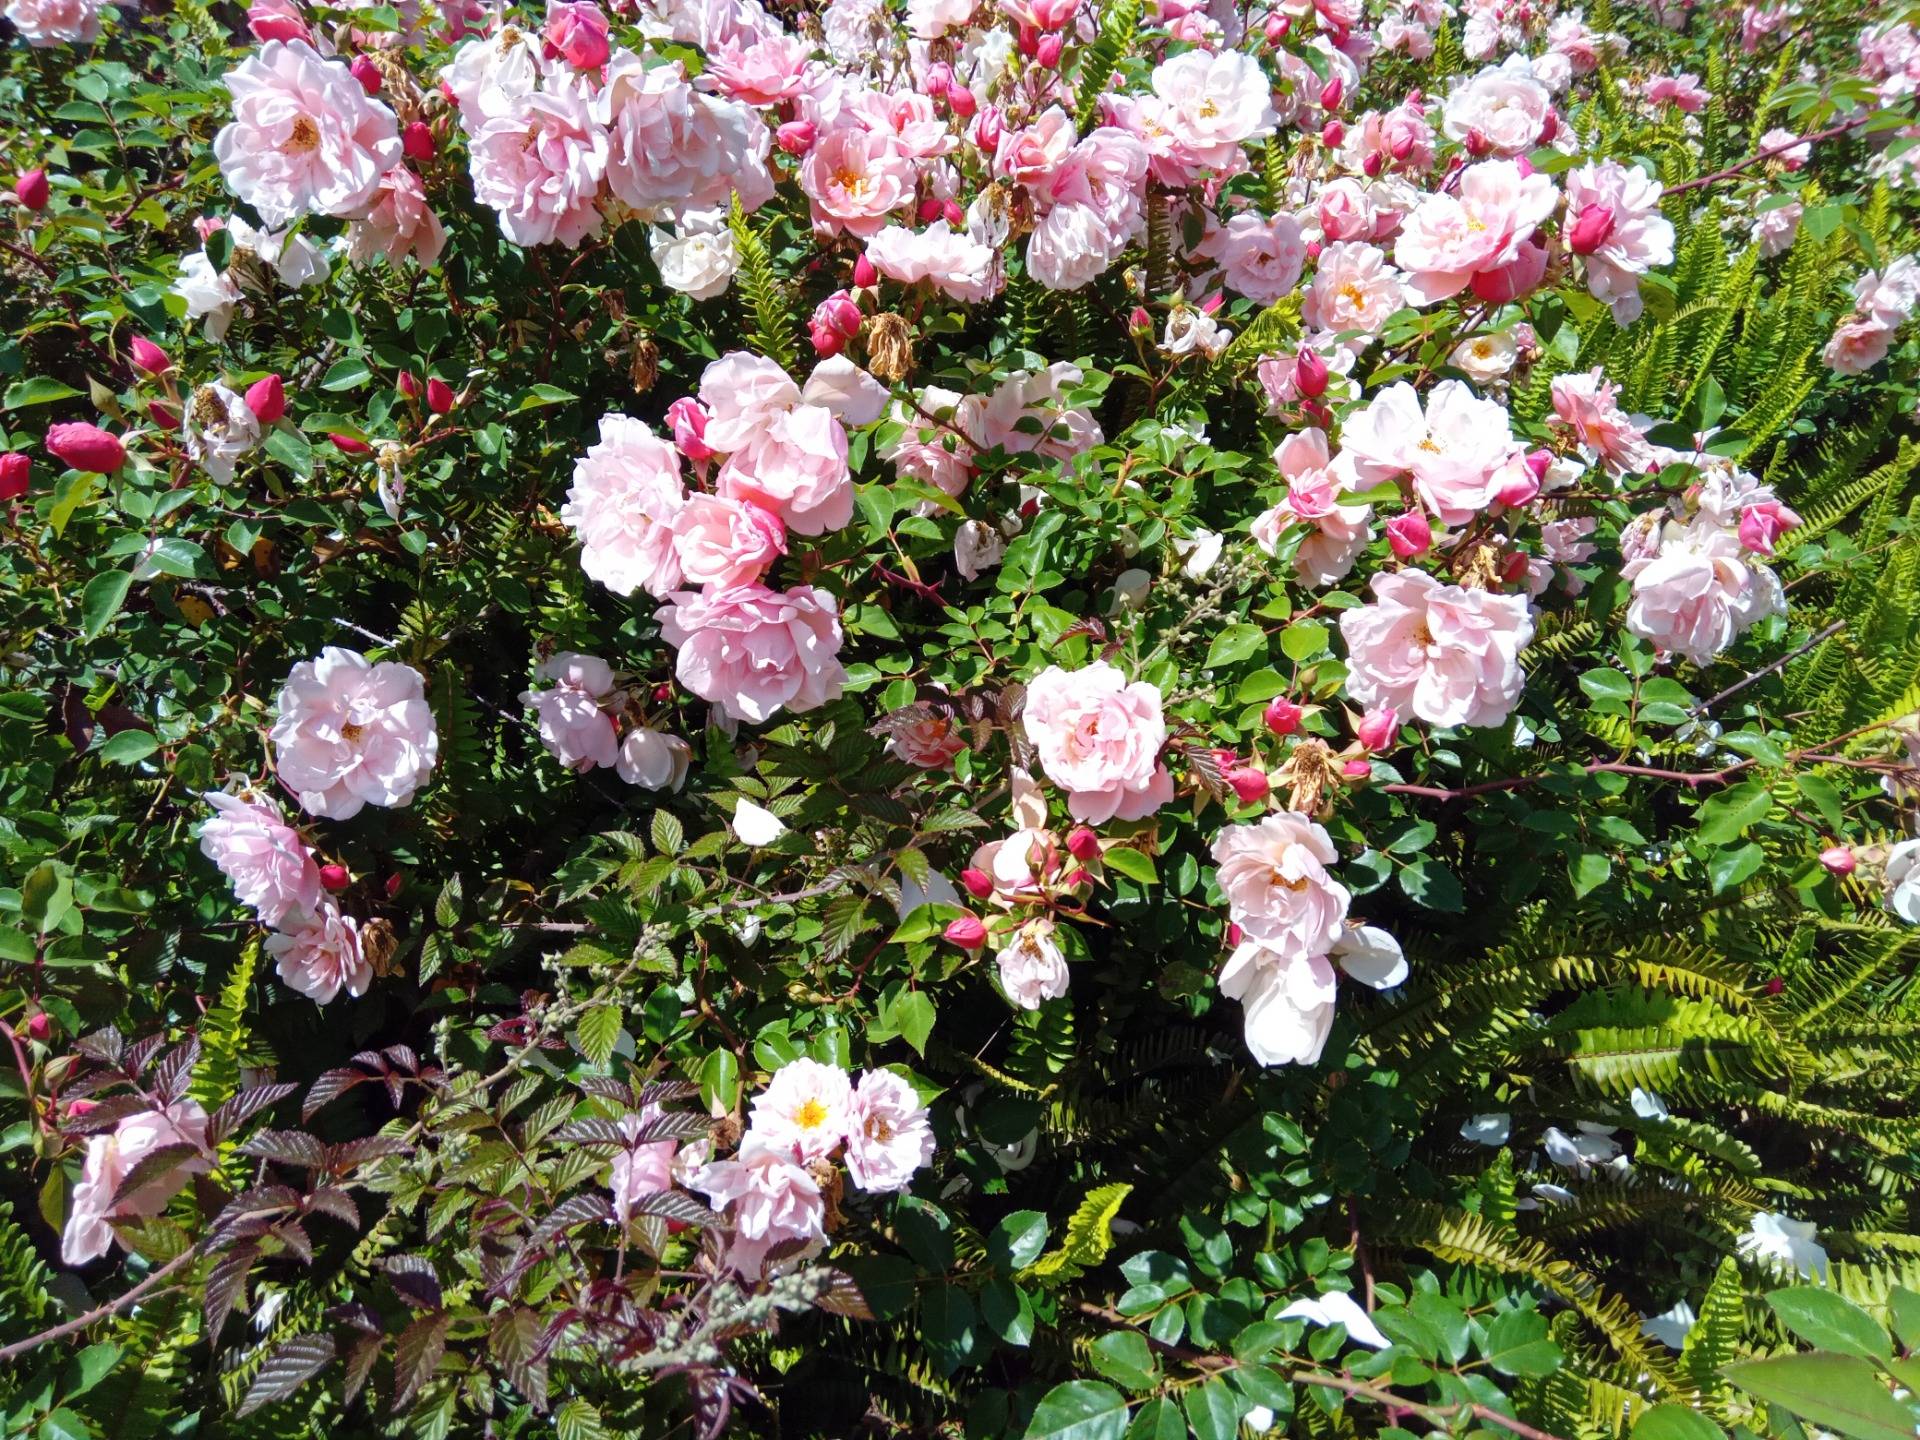 Wild rose bush with exquisite pink shade and exhilarating floral aroma that fills the air all around.